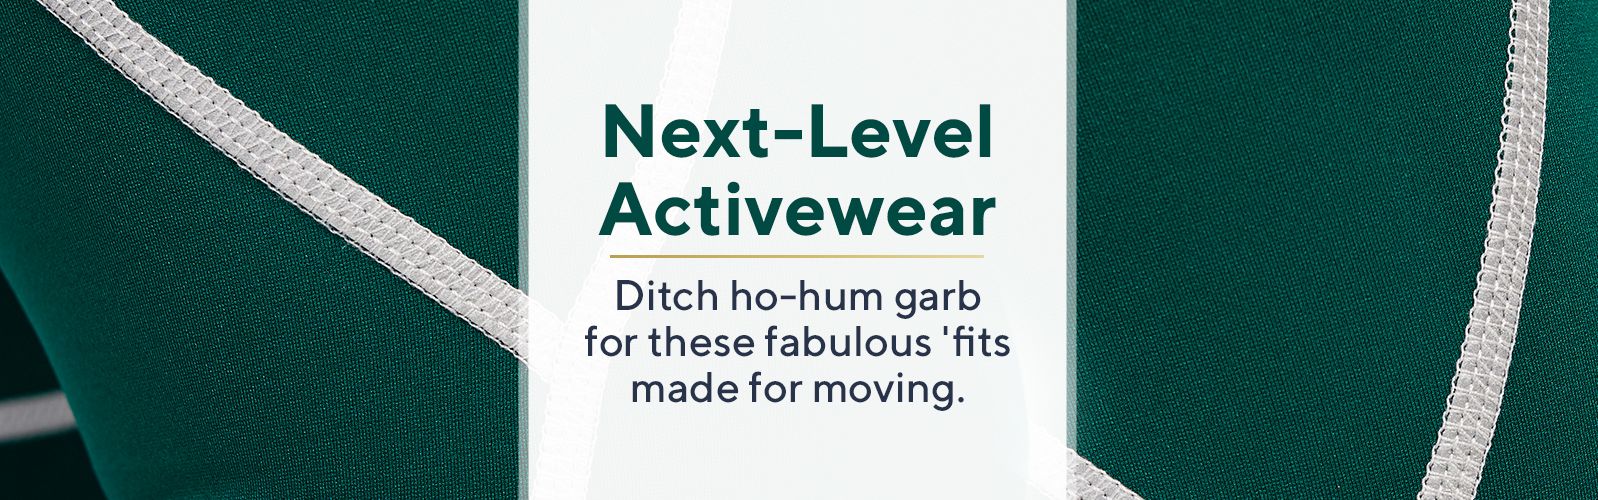 Next-Level Activewear  Ditch ho-hum garb for these fabulous 'fits made for moving.